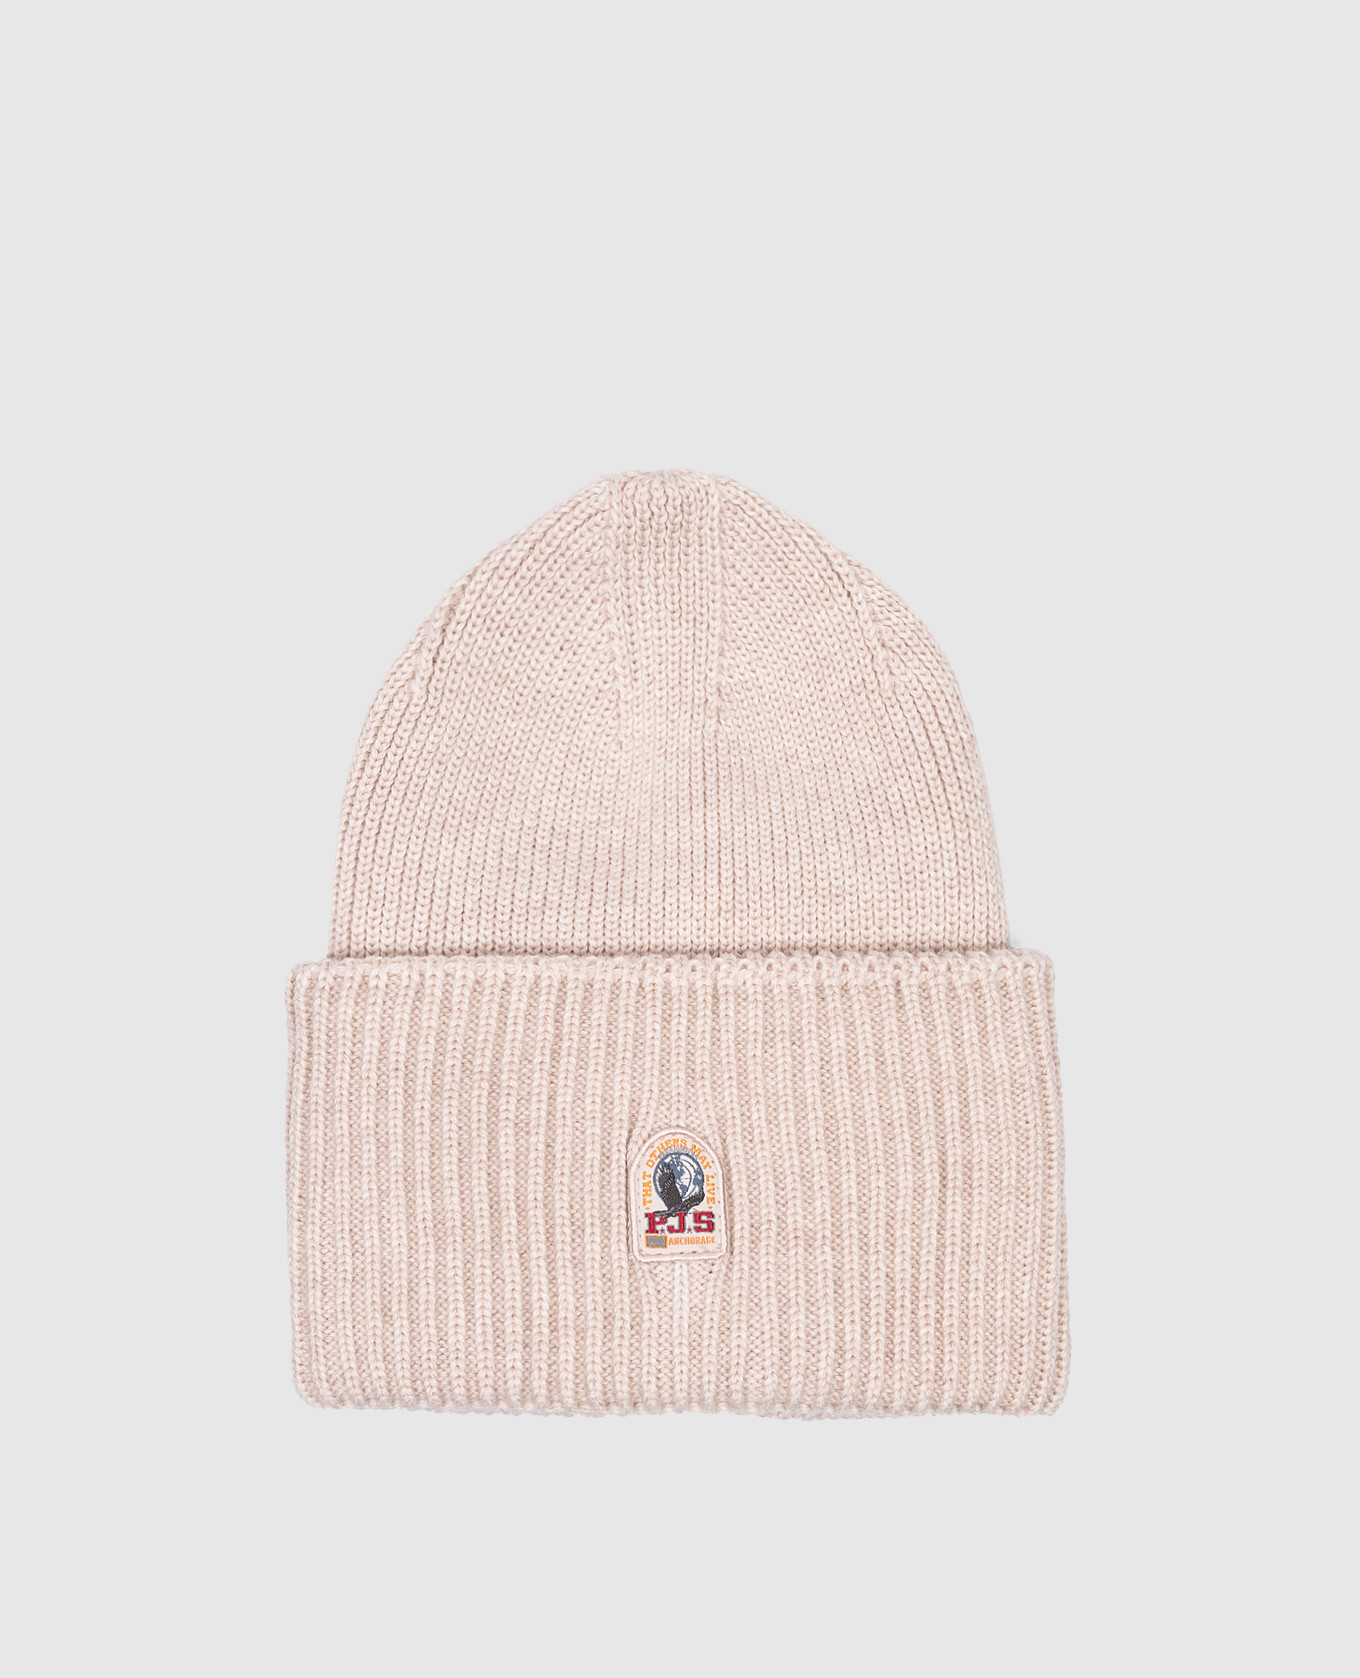 Basic beige wool cap with logo patch